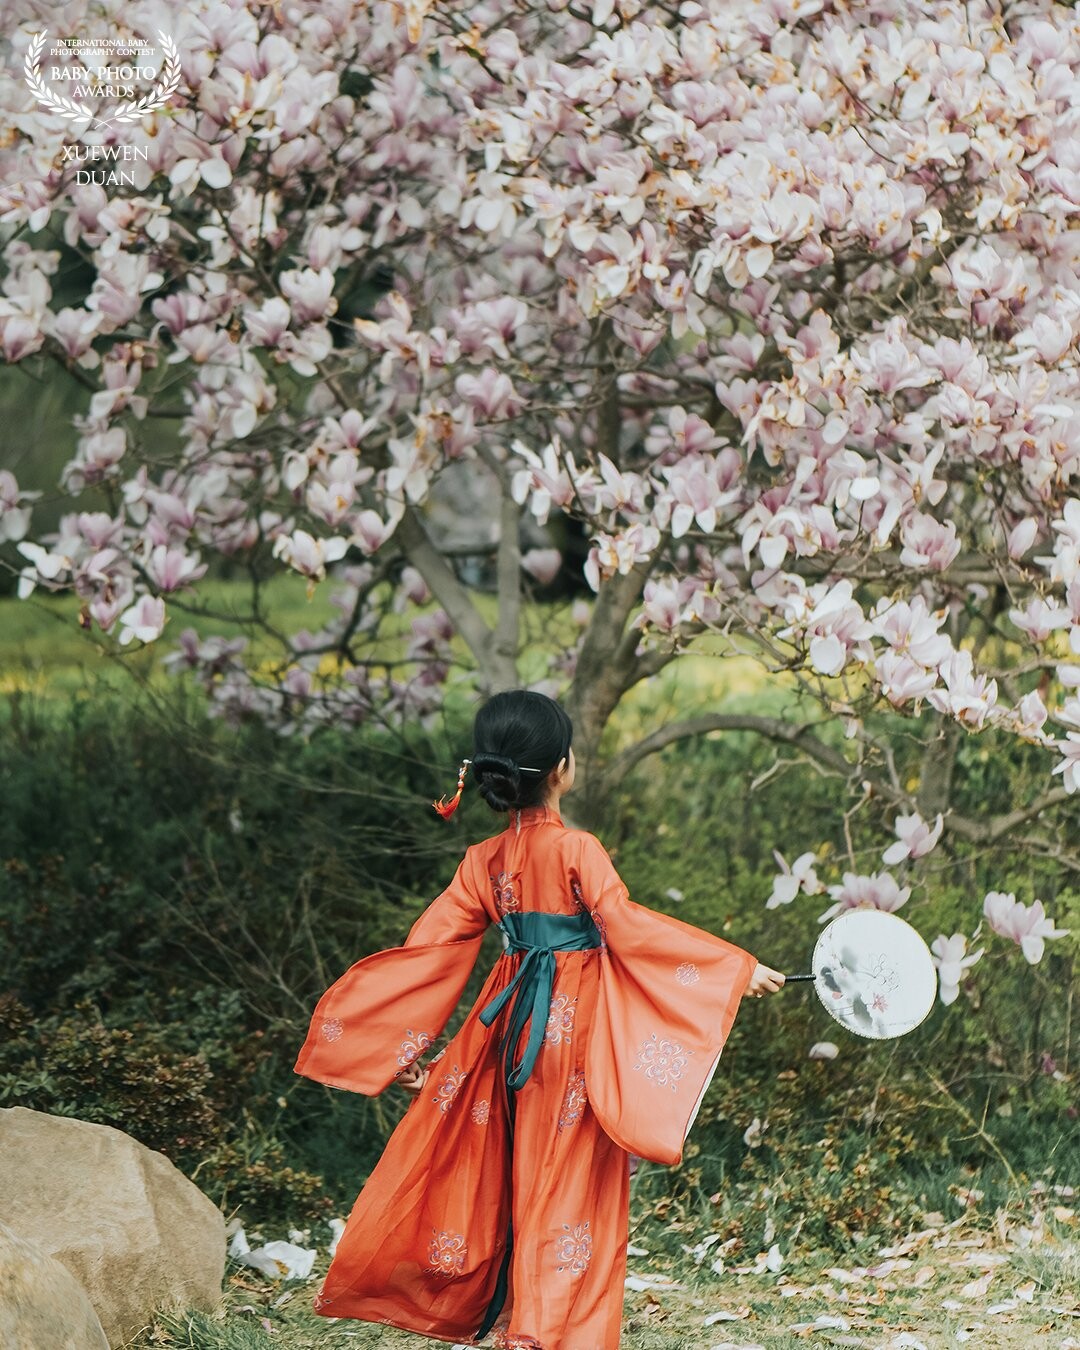 Walking in the park of Qingdao, I caught my favorite picture. A beautiful girl ran to the tree full of flowers in the spring breeze.